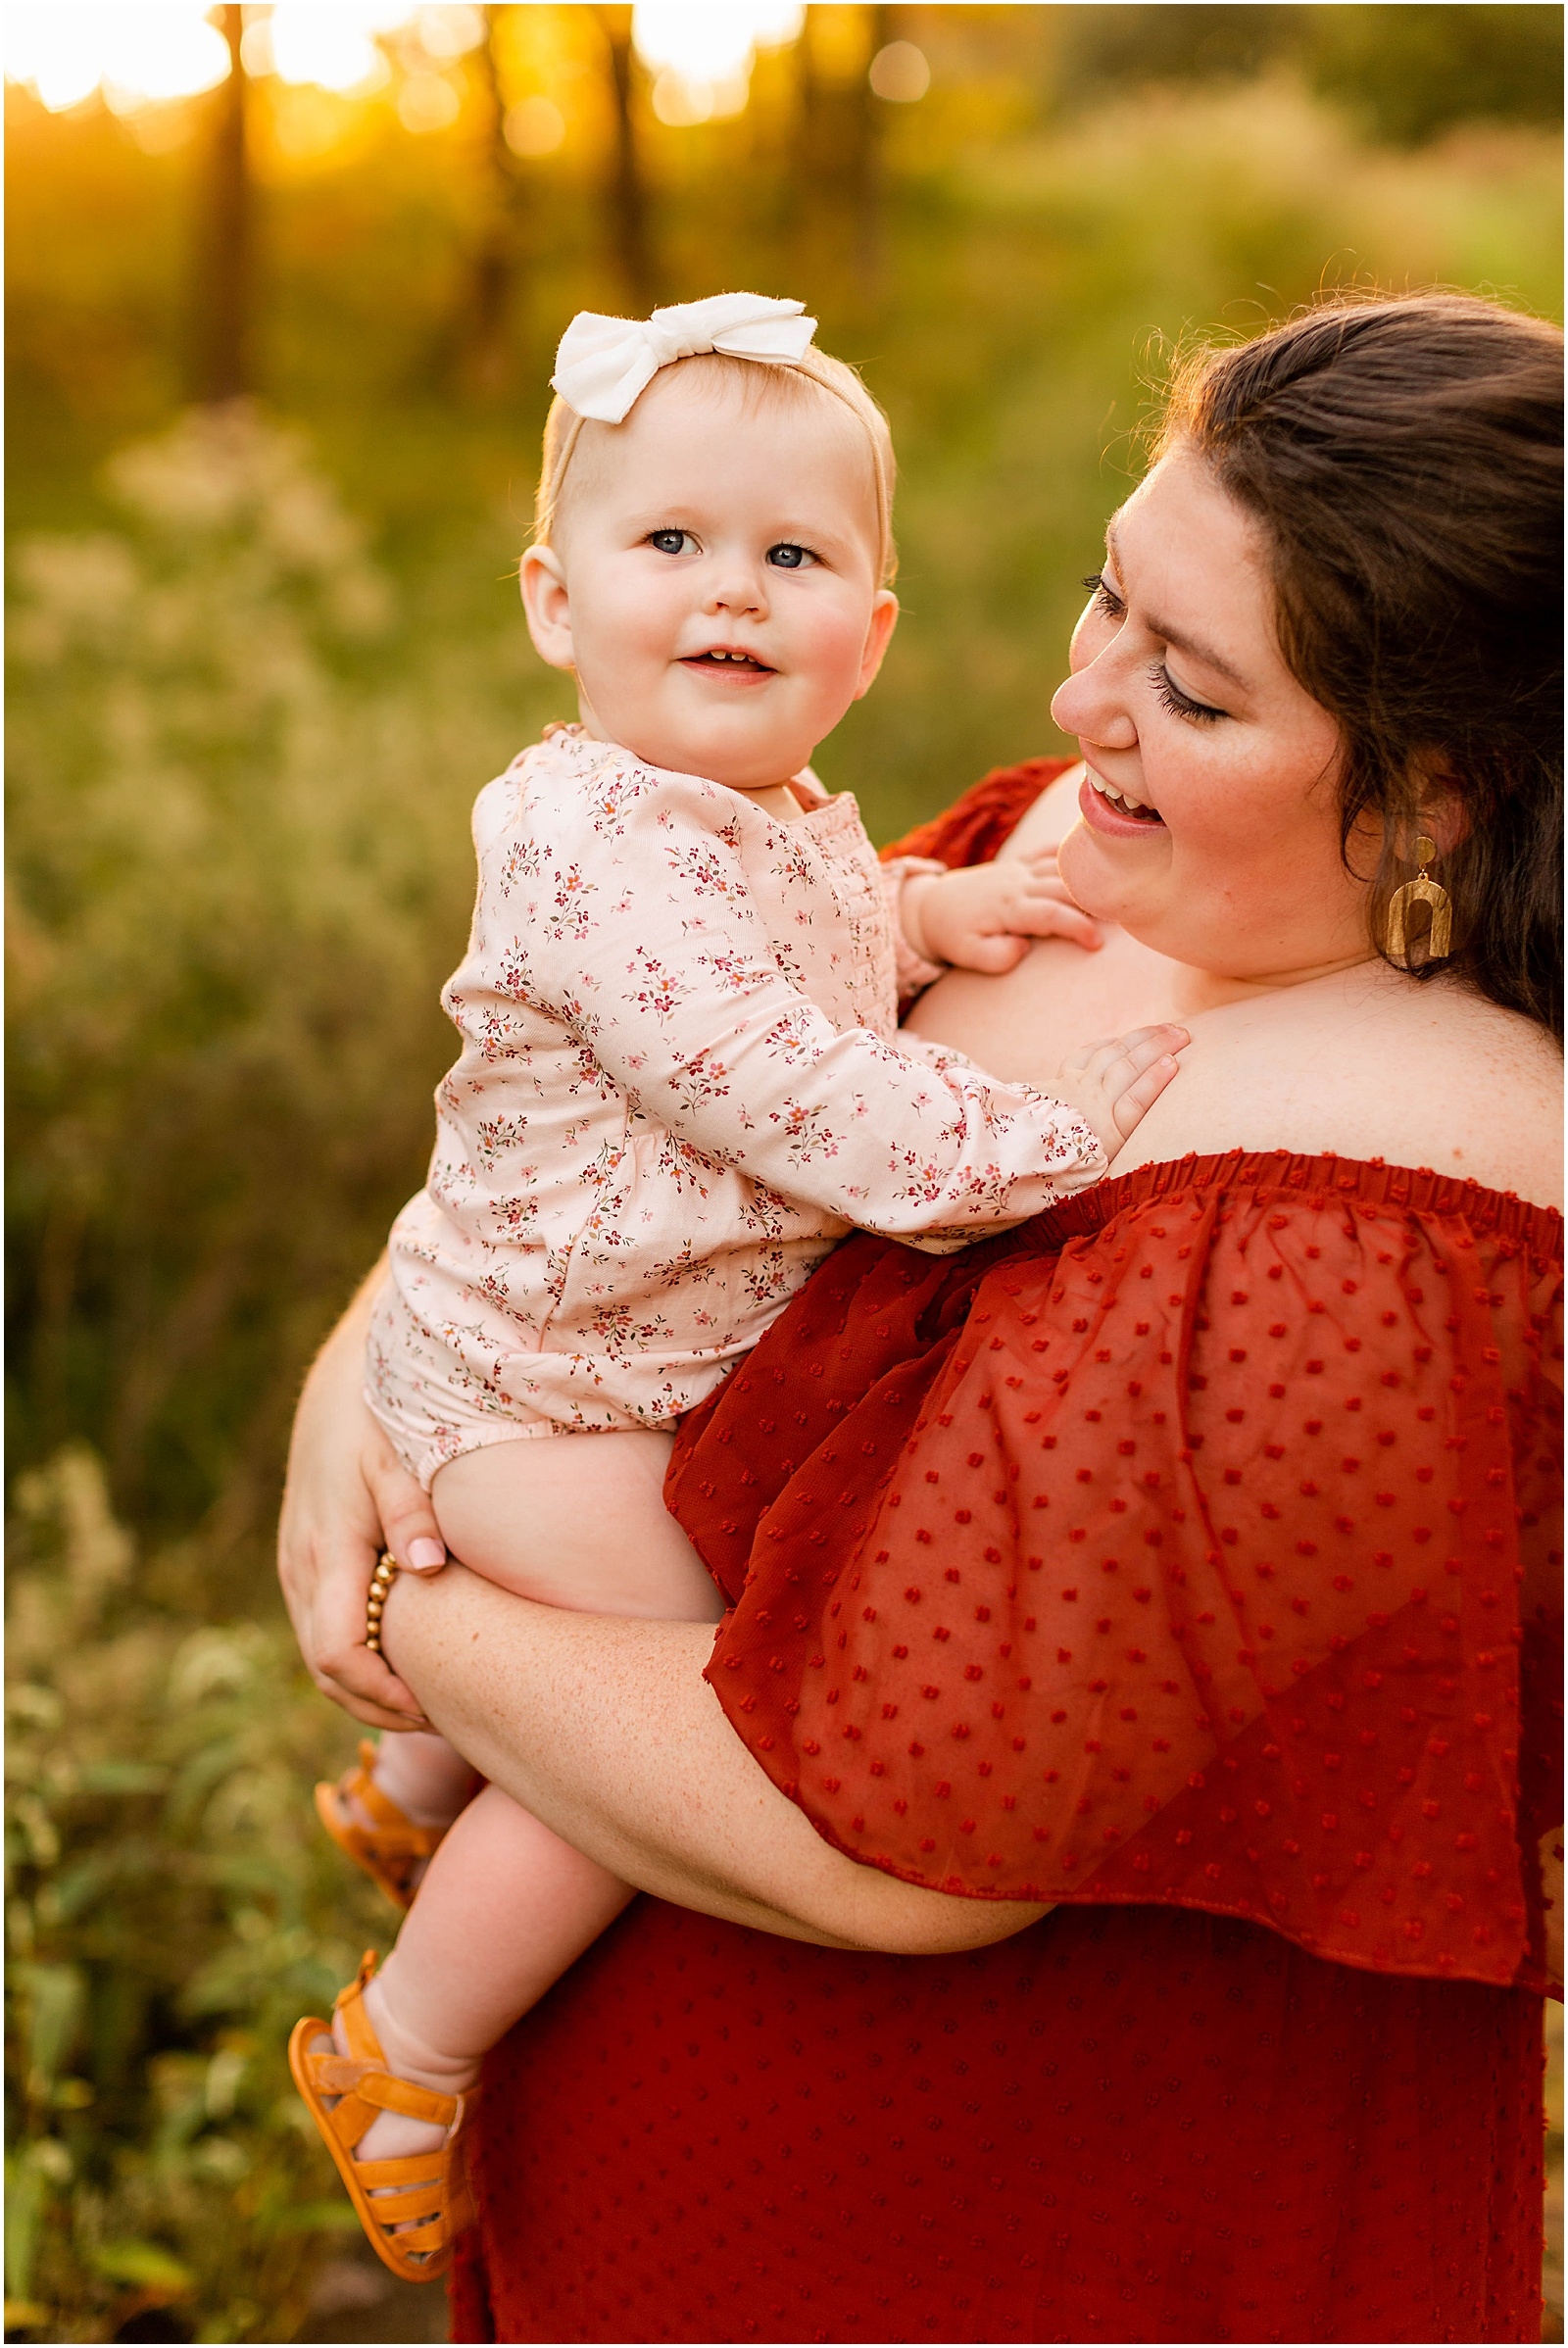 The Peck's Fall Family Session Bret and Brandie Photography | Evansville Indiana Wedding Photographers_0020.jpg